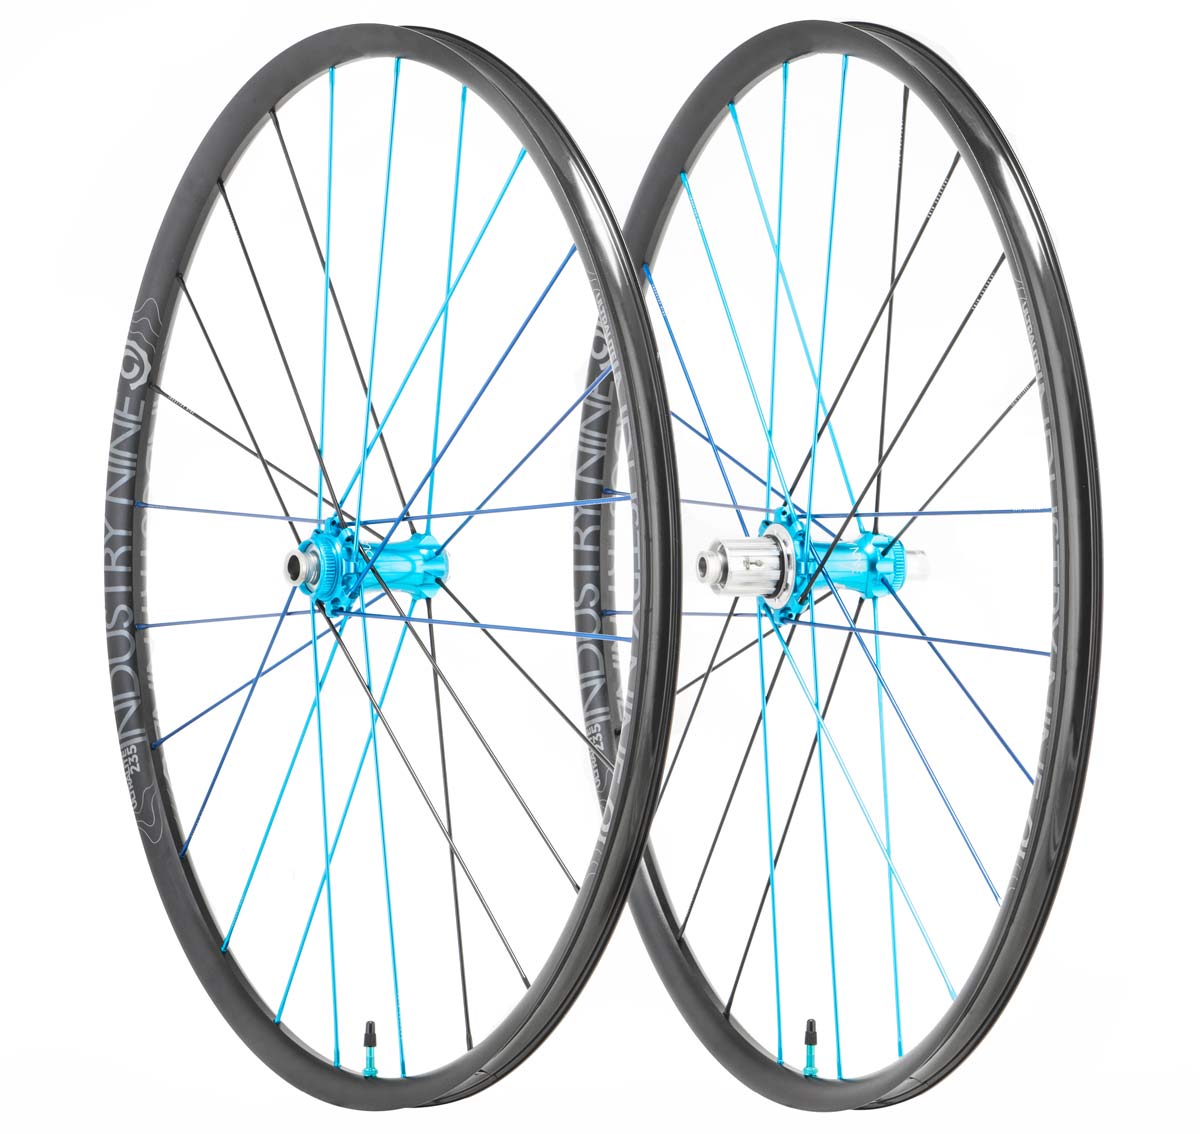 Industry Nine UL235 Torch Road Alloy cyclocross and gravel race bike wheels